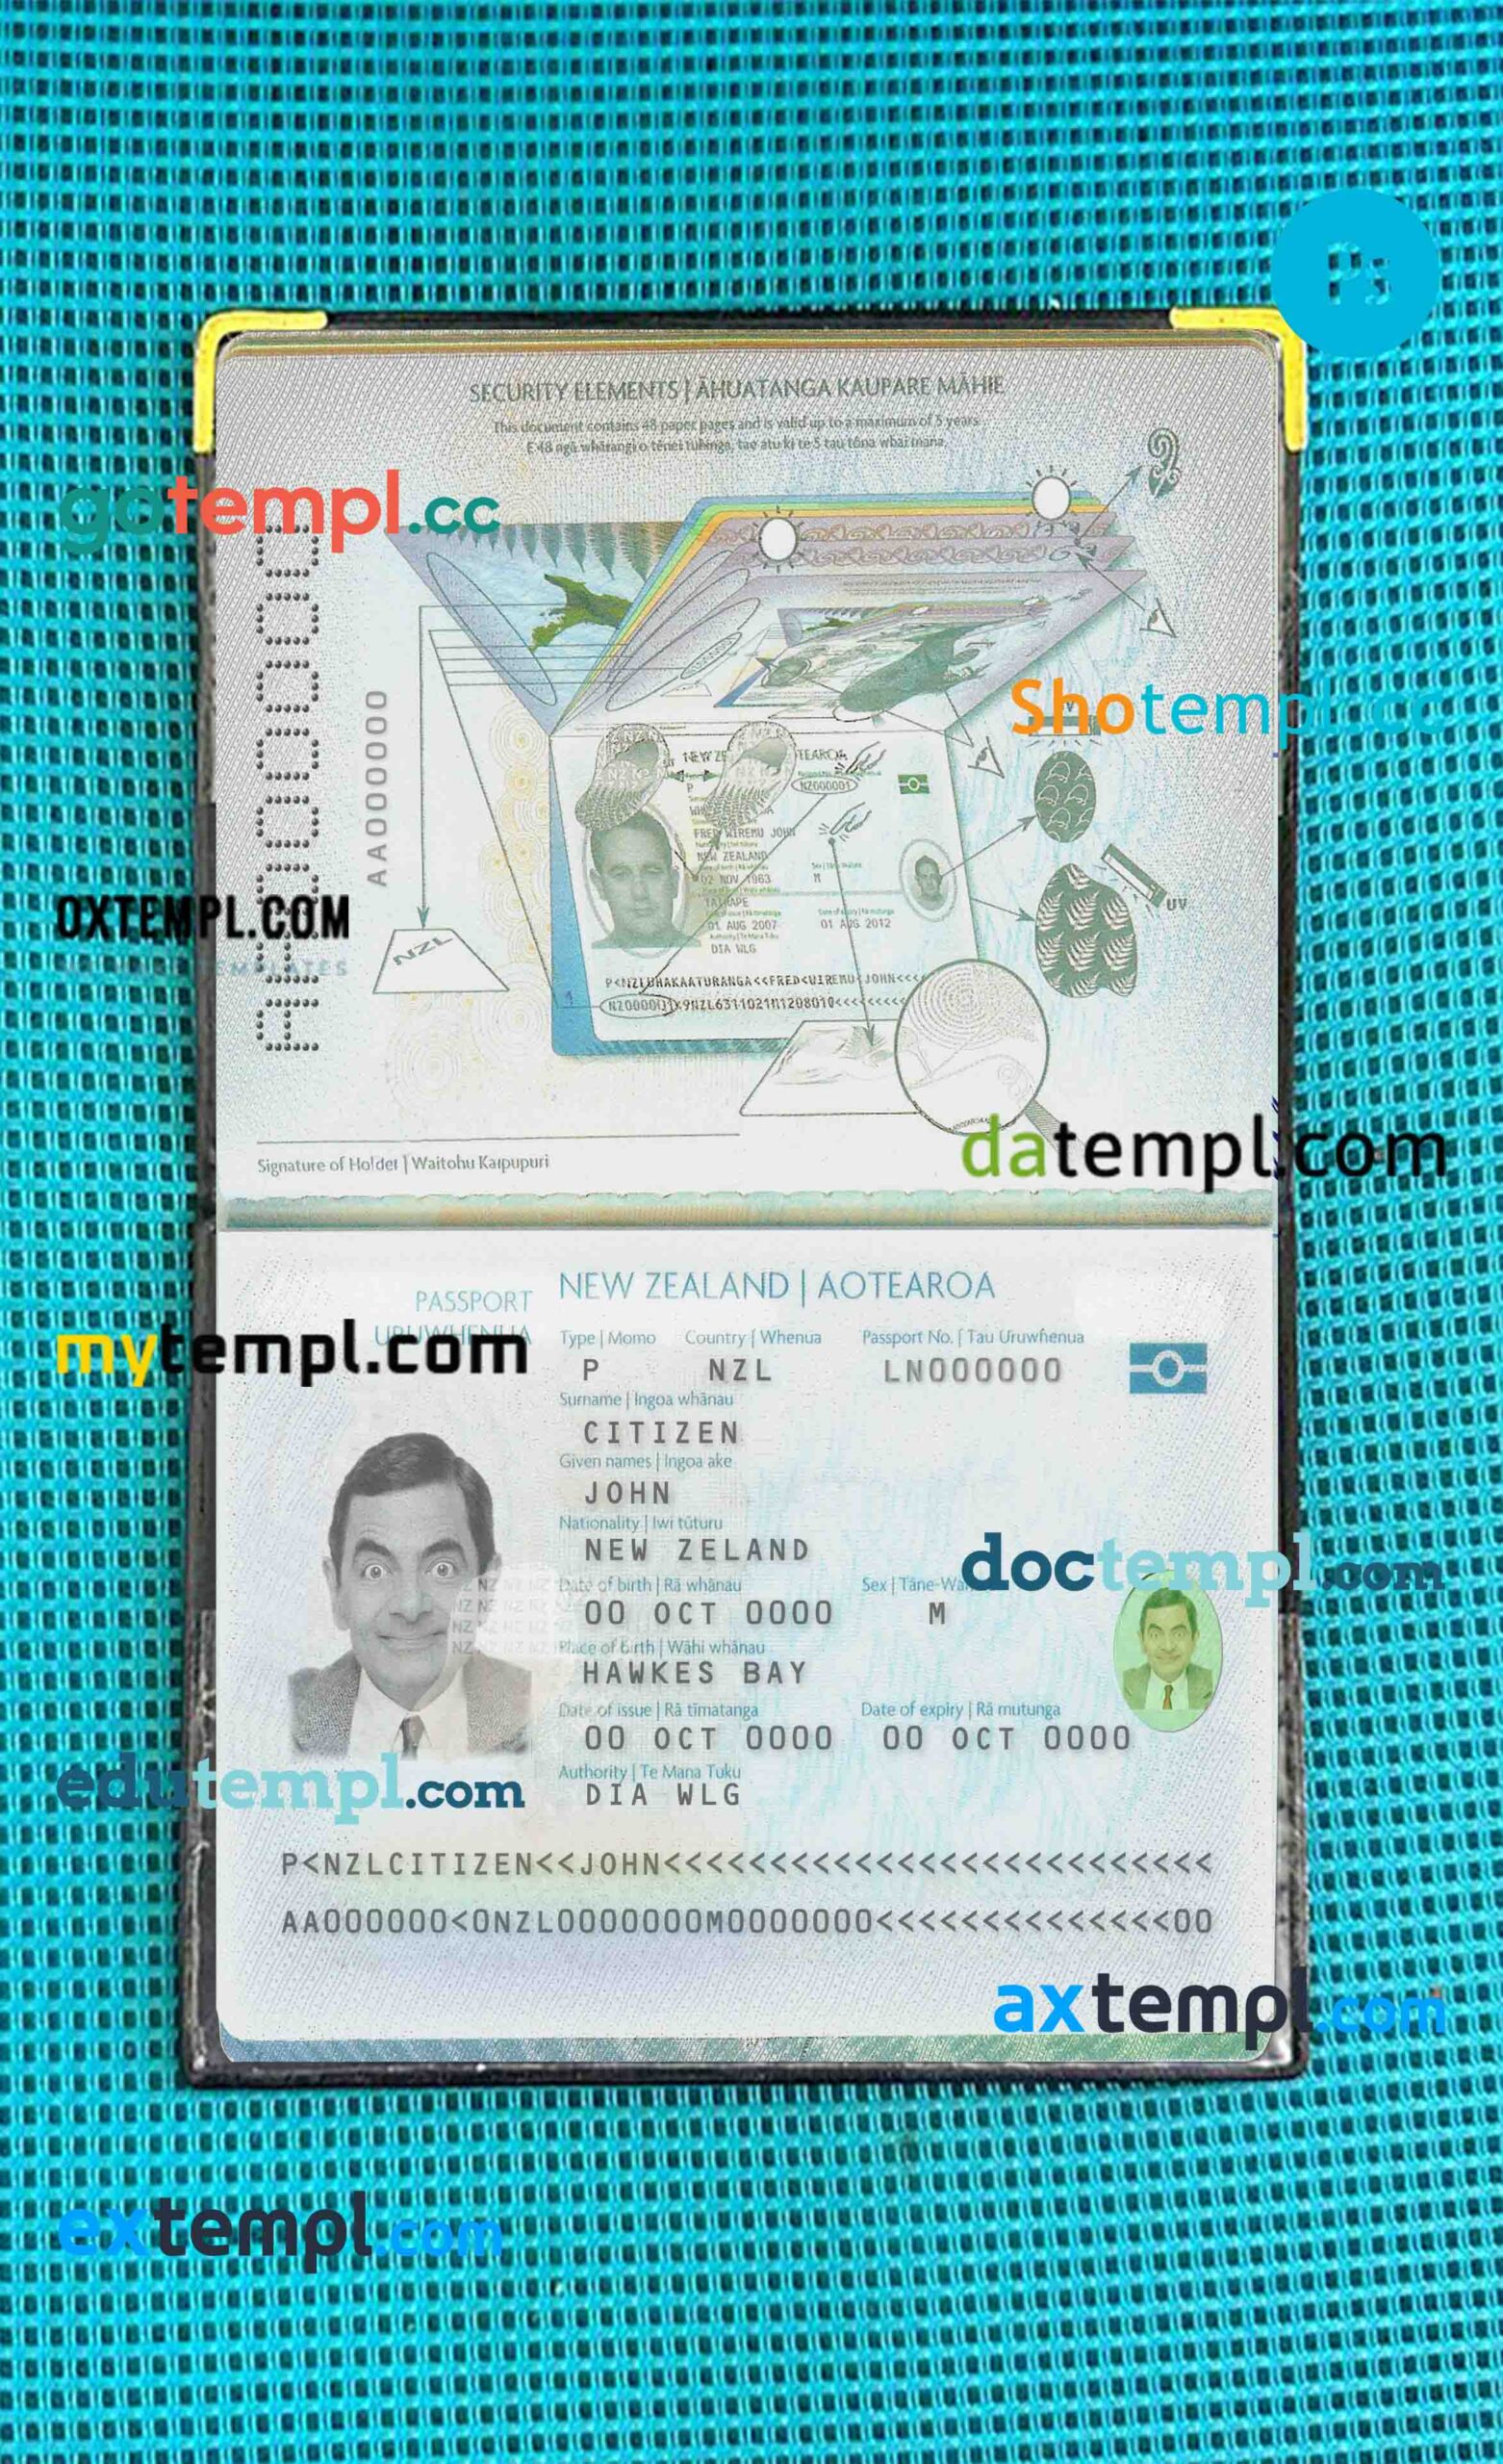 New Zealand passport editable PSD files, scan and photo taken image (2005-present), 2 in 1